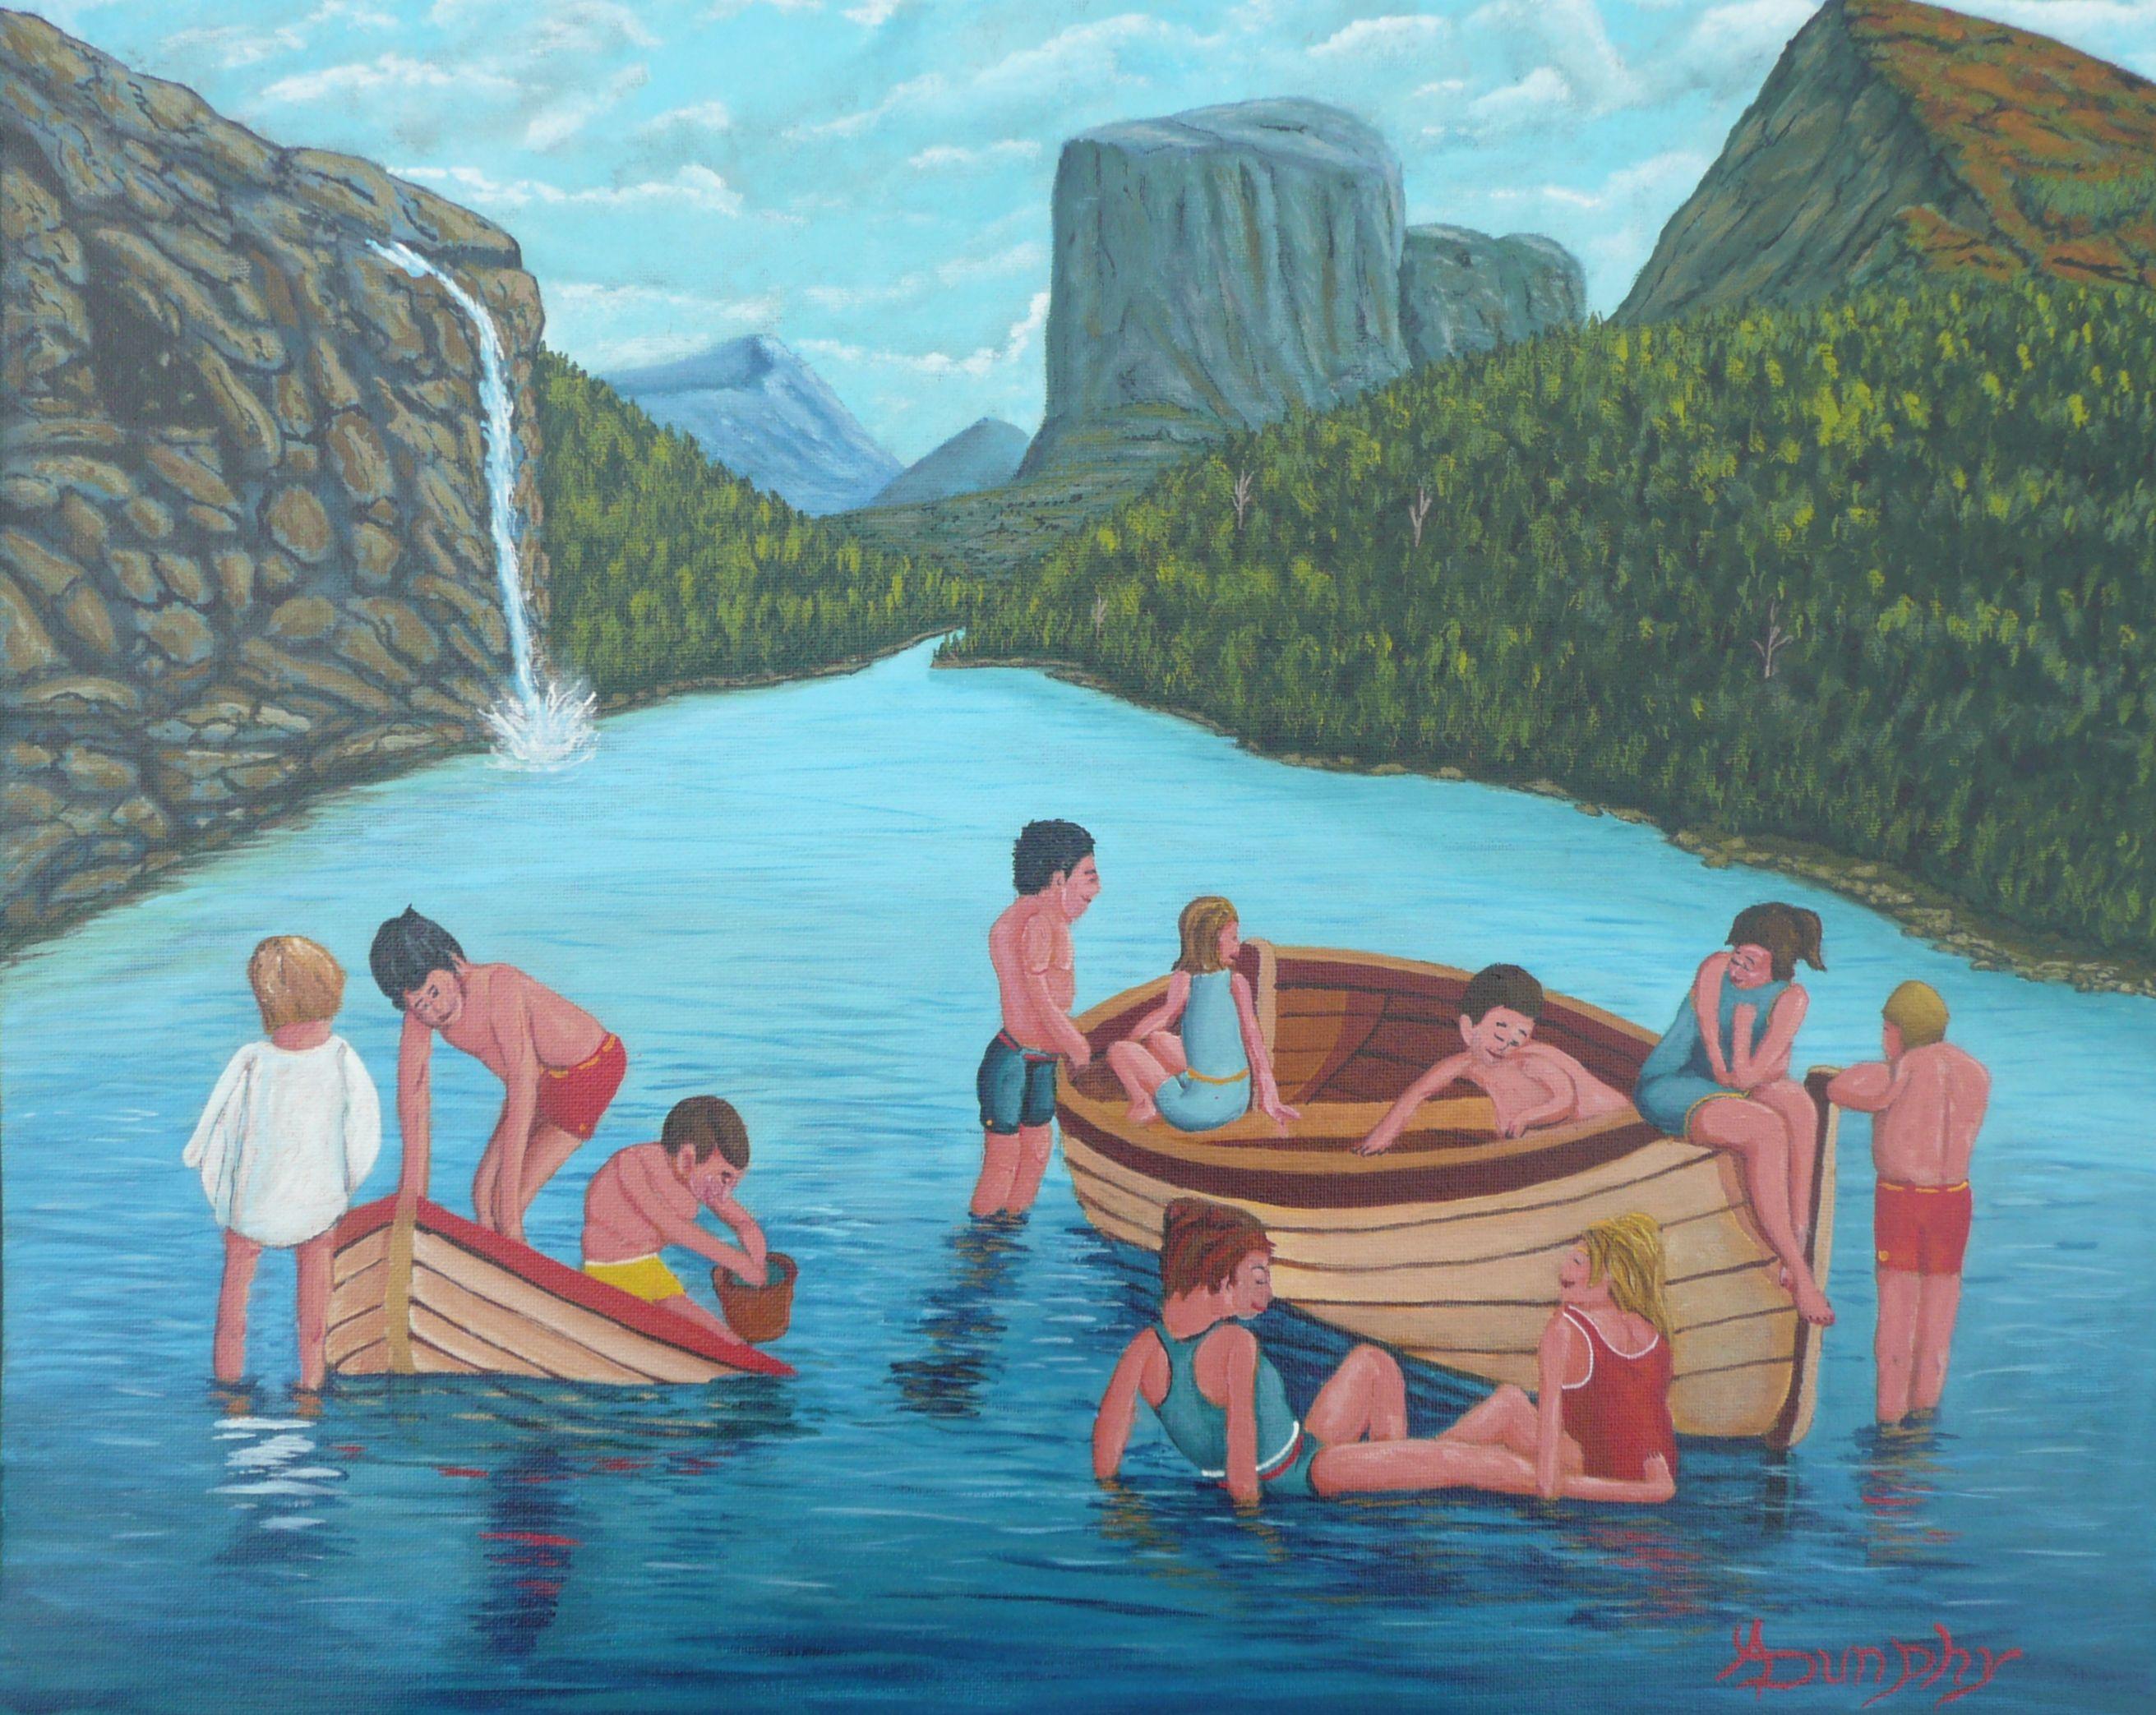 This delightful summer scene depicts a large group of children playing on a pair of old boats that are not afloat in a mountain valley river. Childhood is a great time to create friendships and life long memories. This landscape has been created